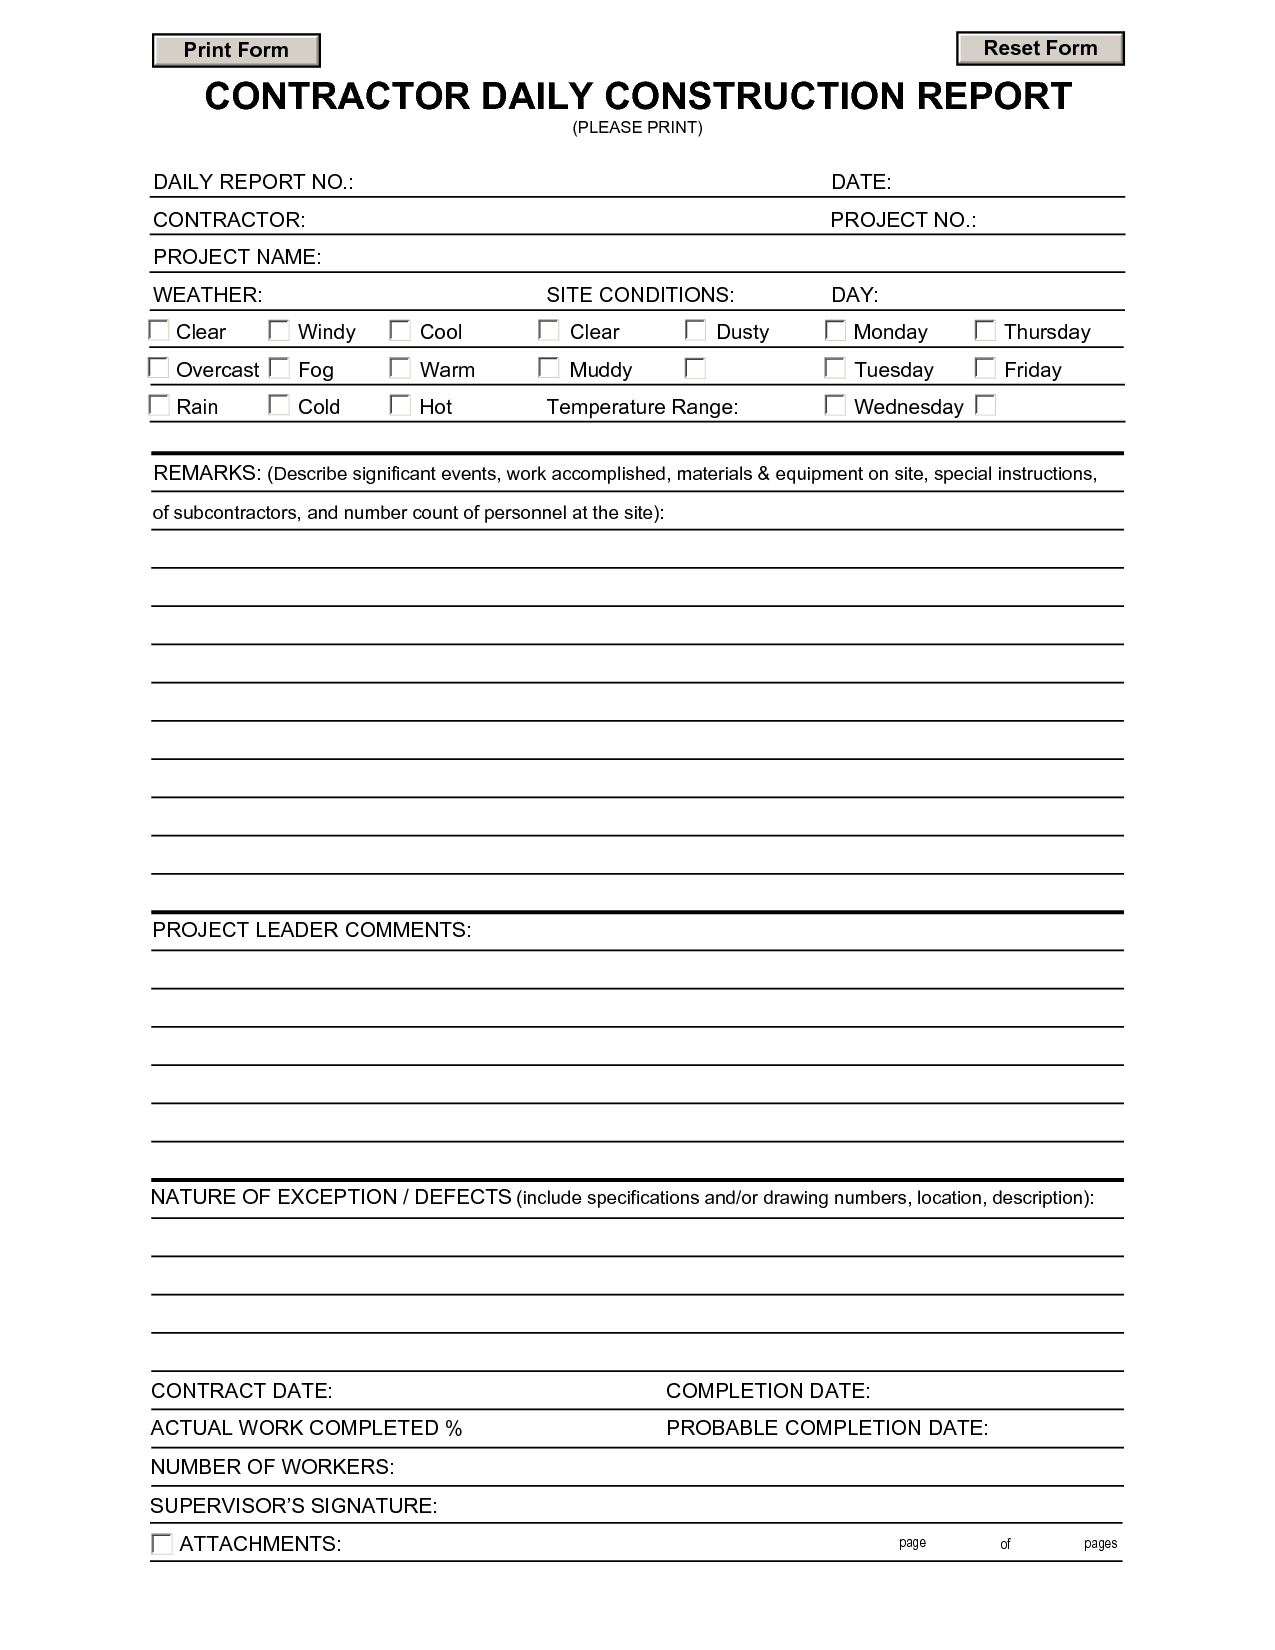 Construction Daily Report Template | Contractors | Report Pertaining To Daily Reports Construction Templates